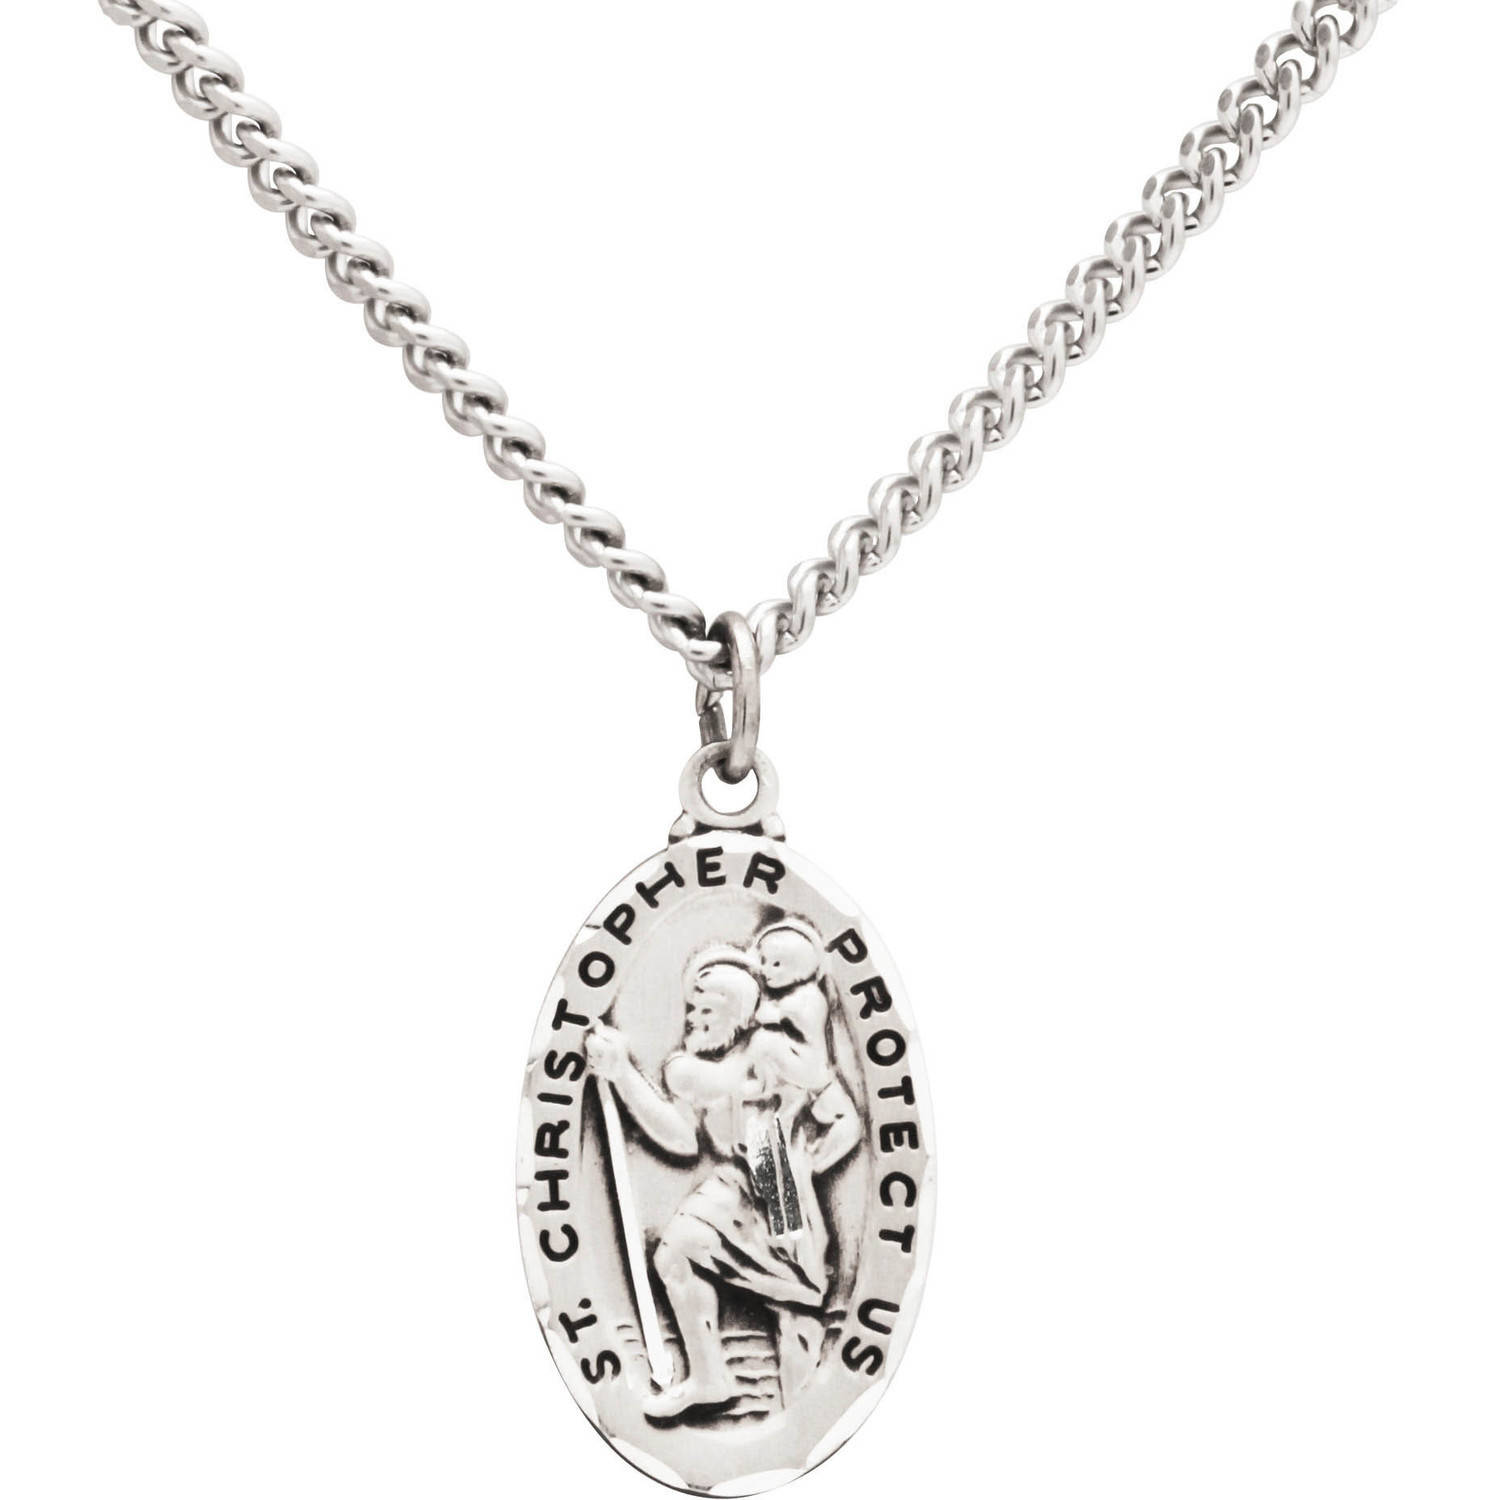 Oval St. Christopher Medal Sterling Silver Pendant Necklace, 24" Chain - image 1 of 7